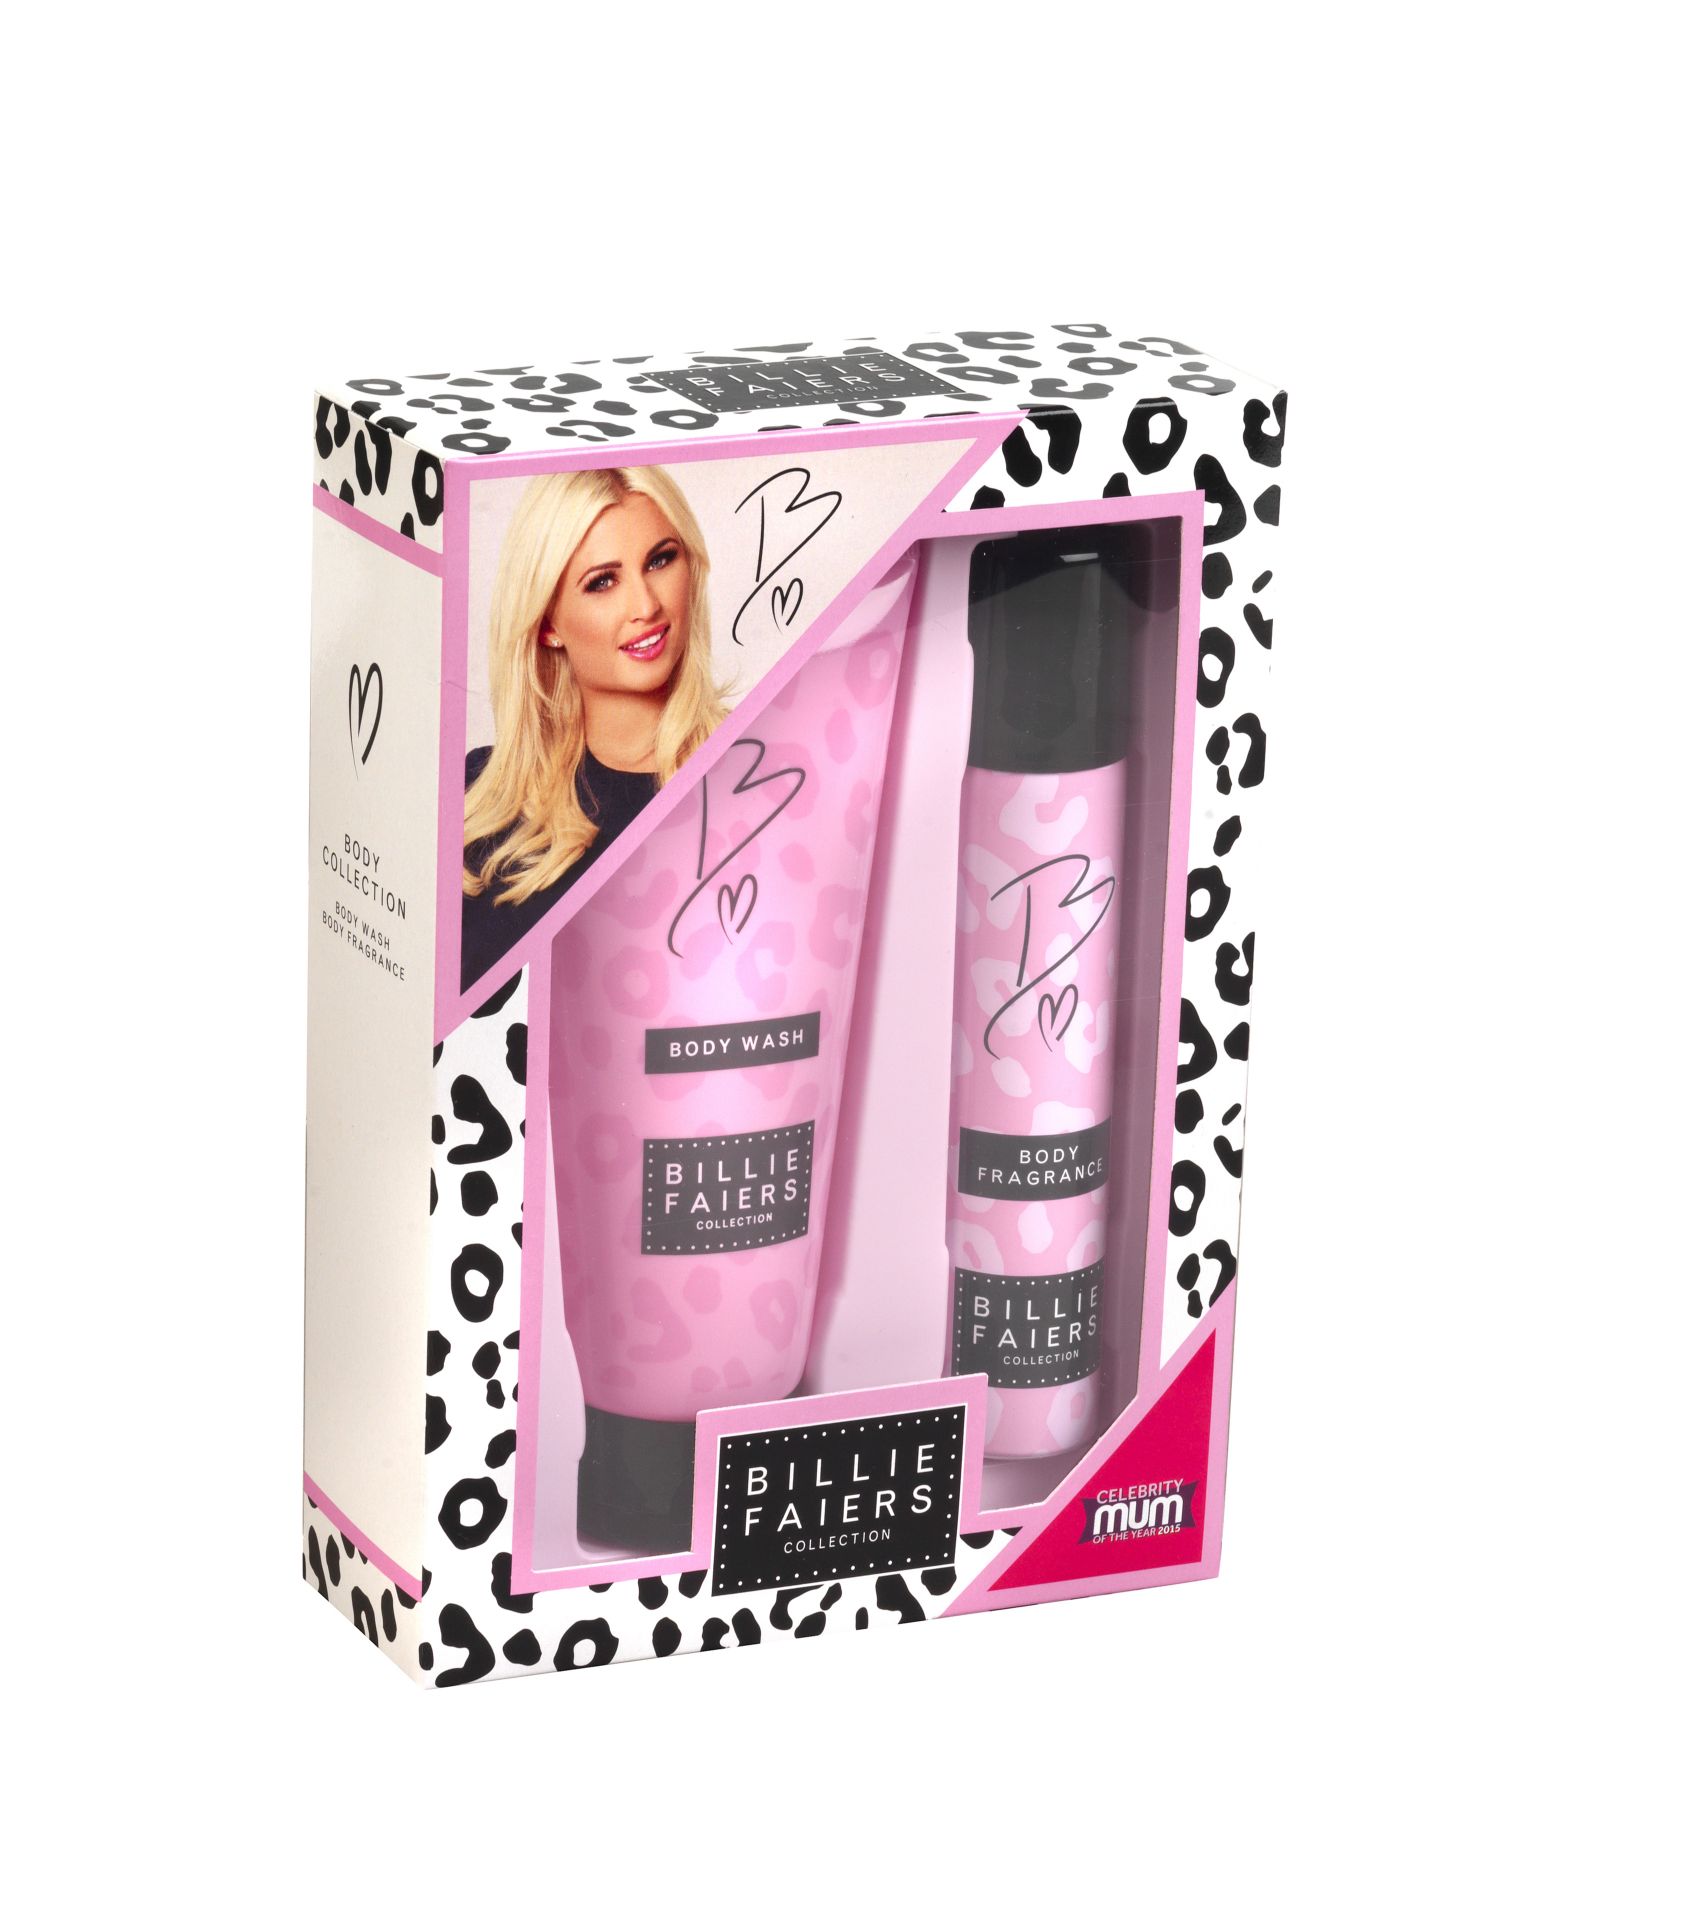 V *TRADE QTY* Brand New Billie Faiers Body Collection With Body Wash And Body Fragrance X 48 Bid